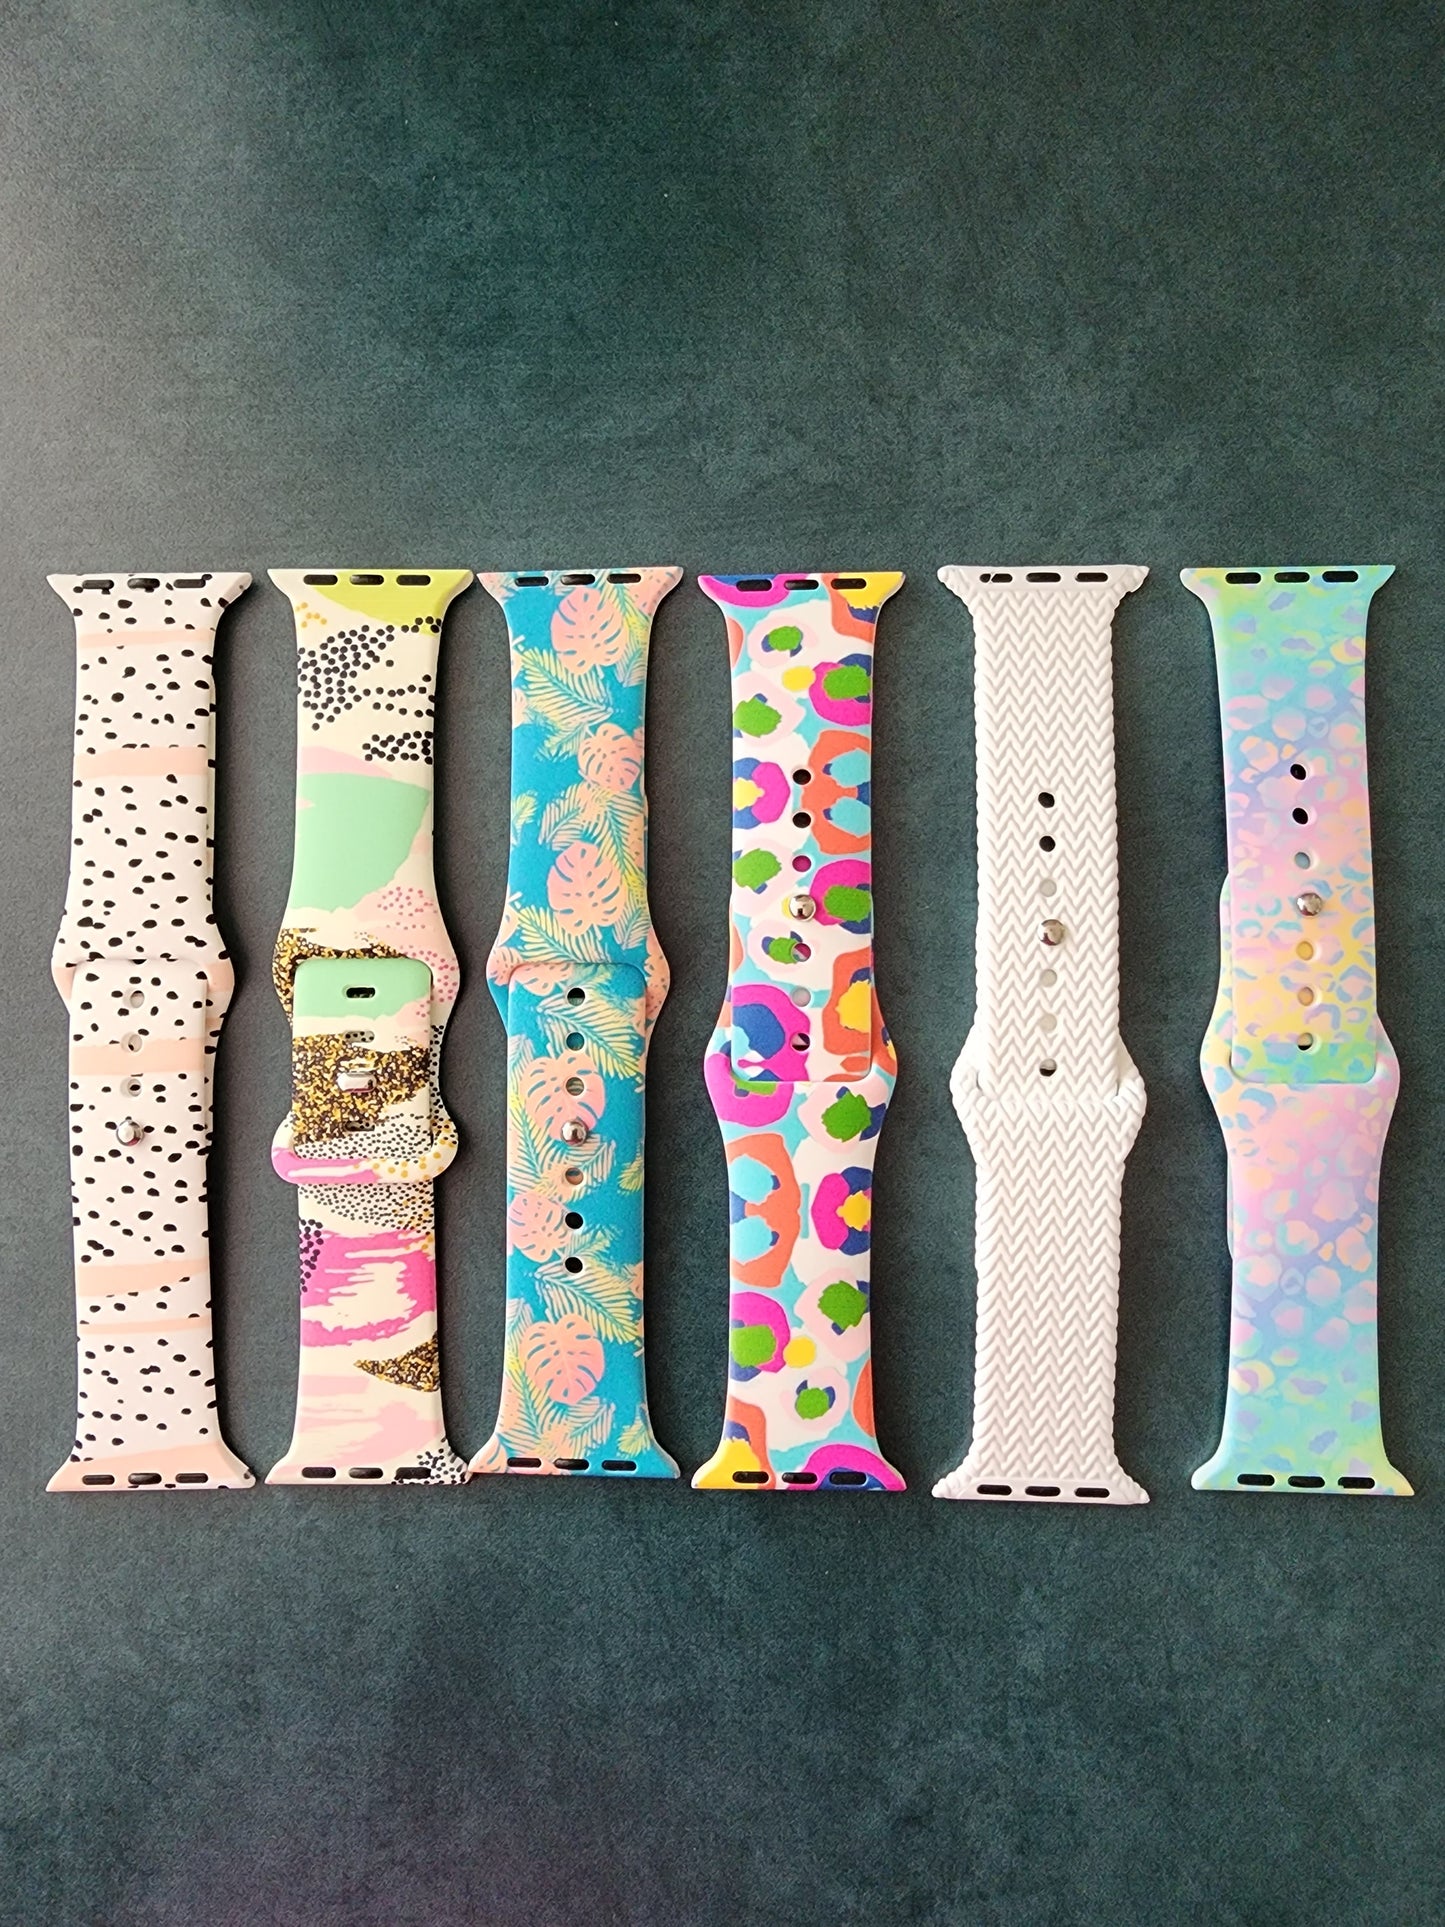 Watch Bands Size 38/40